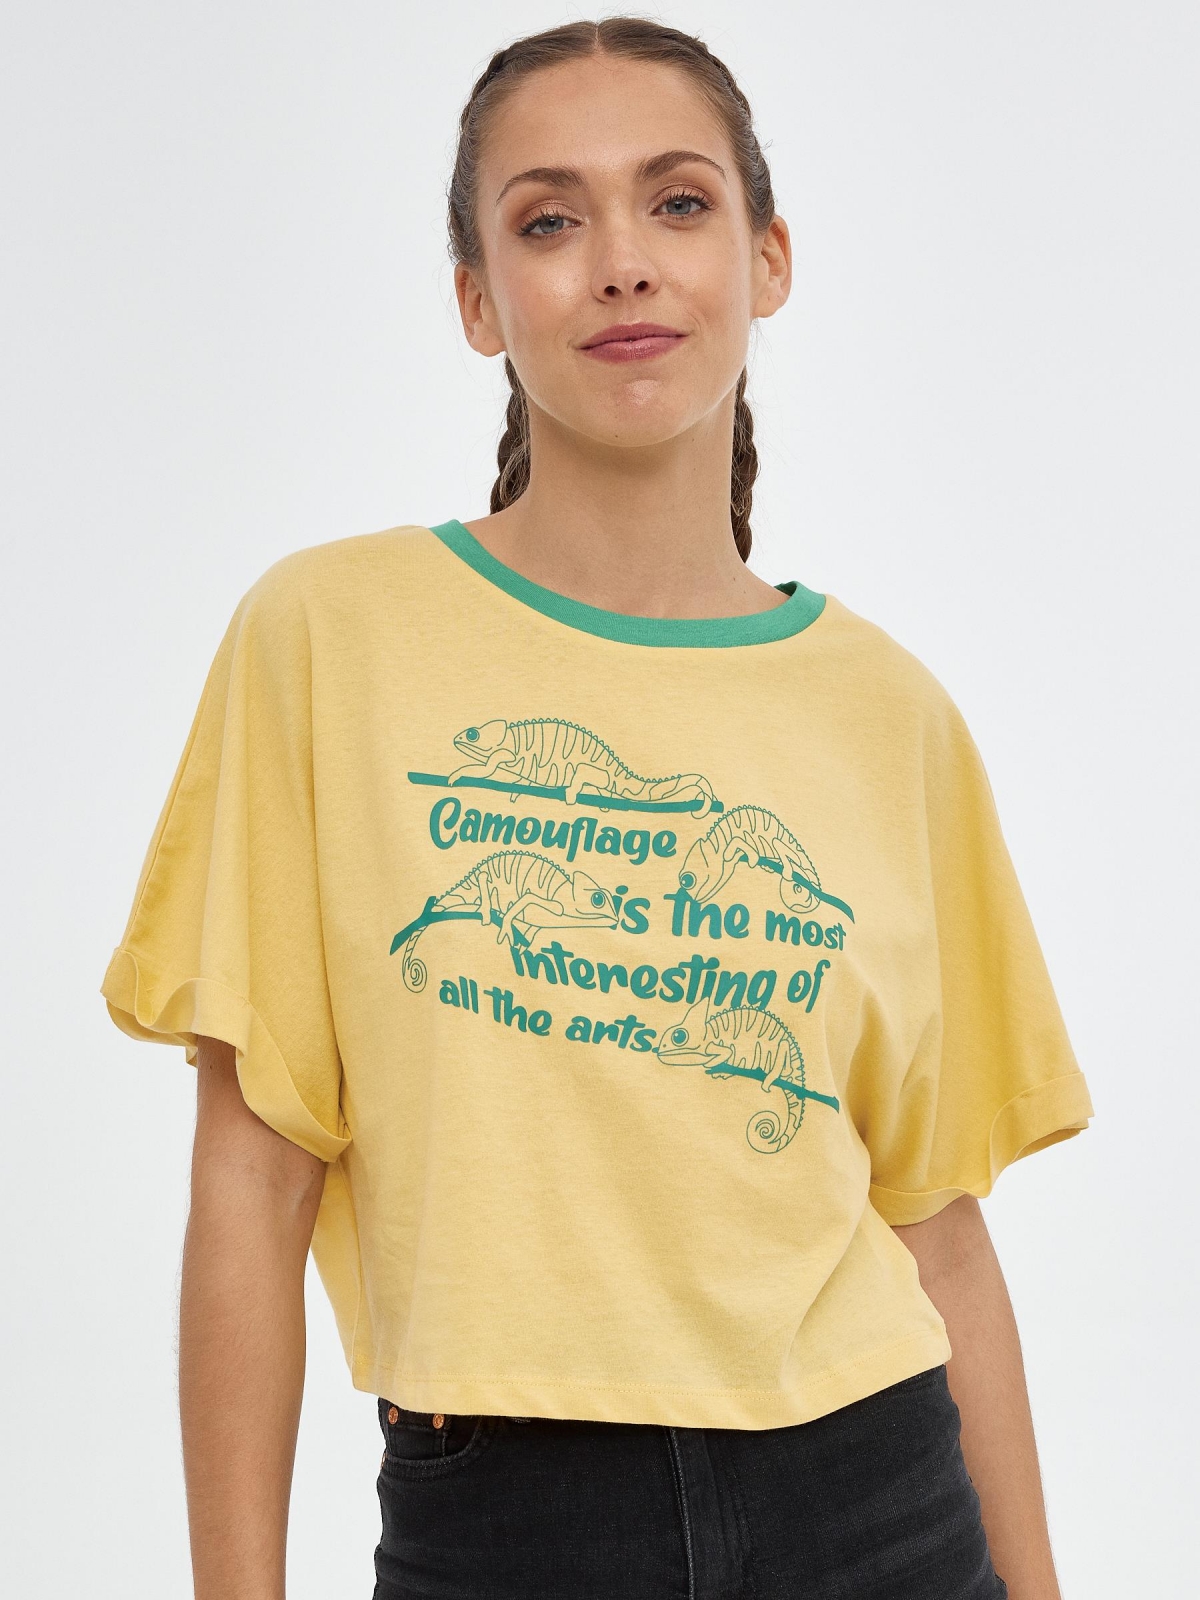 Chameleon crop top pastel yellow middle front view